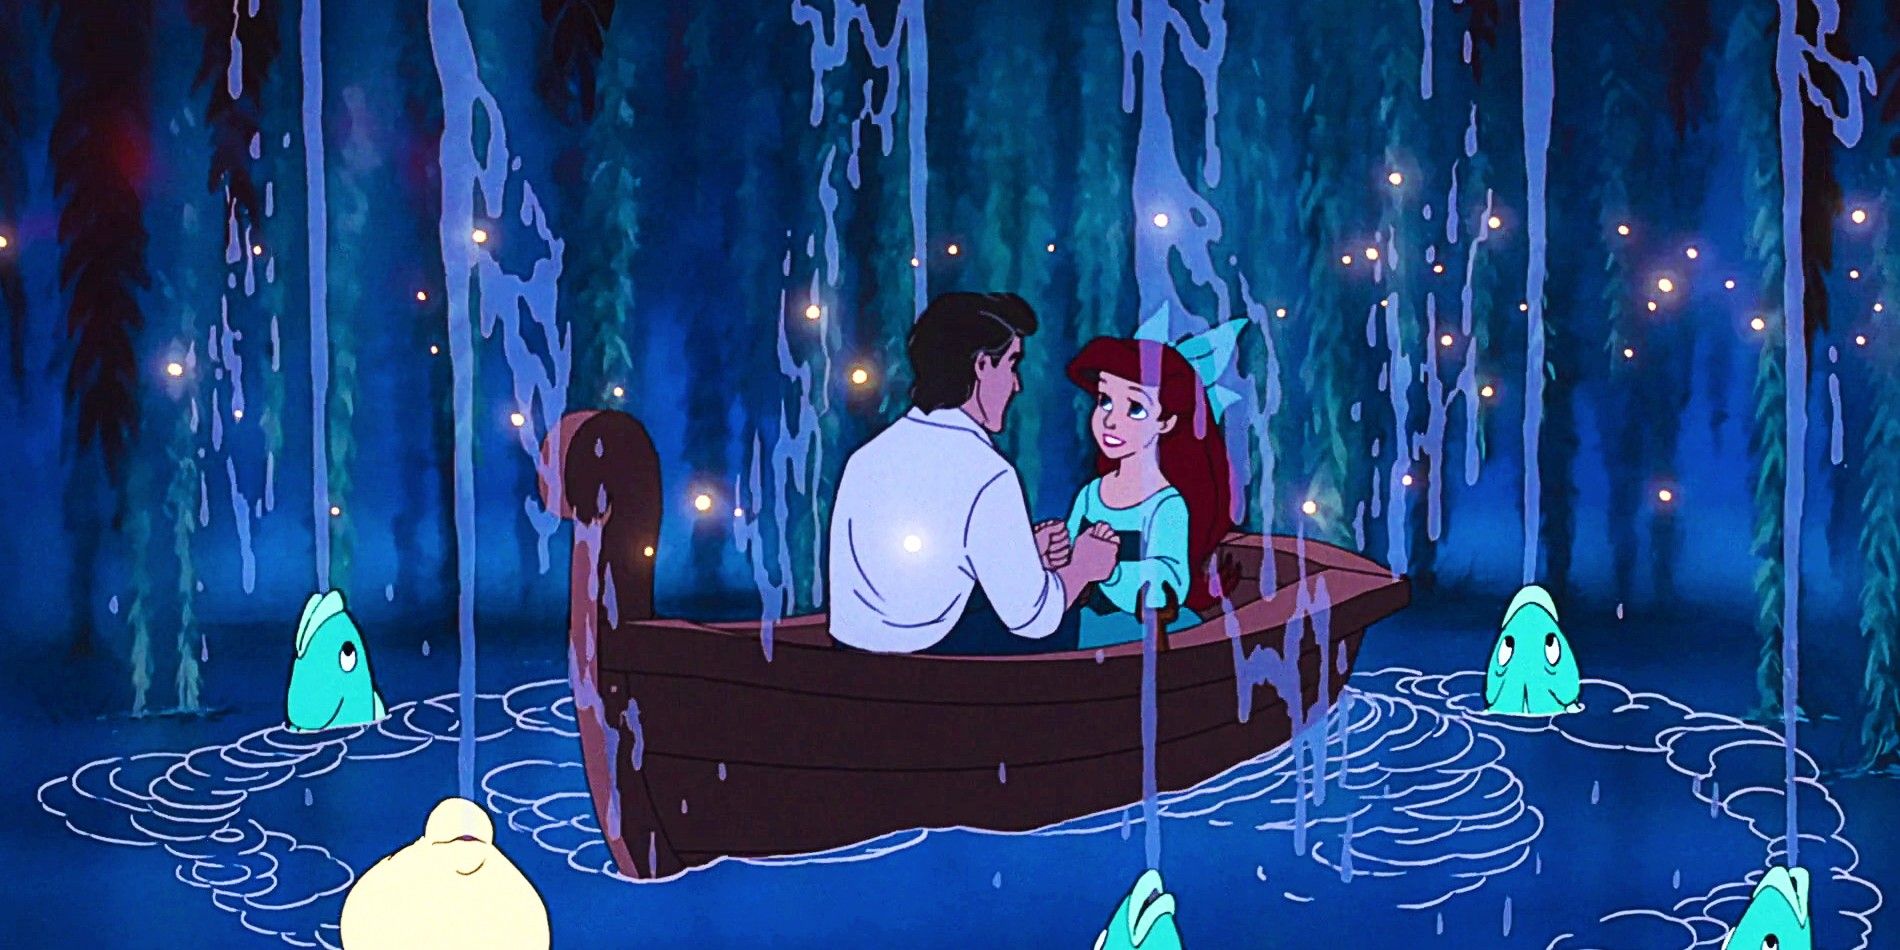 Little Mermaid Set Photos Show Possible Kiss the Girl Scene Being Filmed